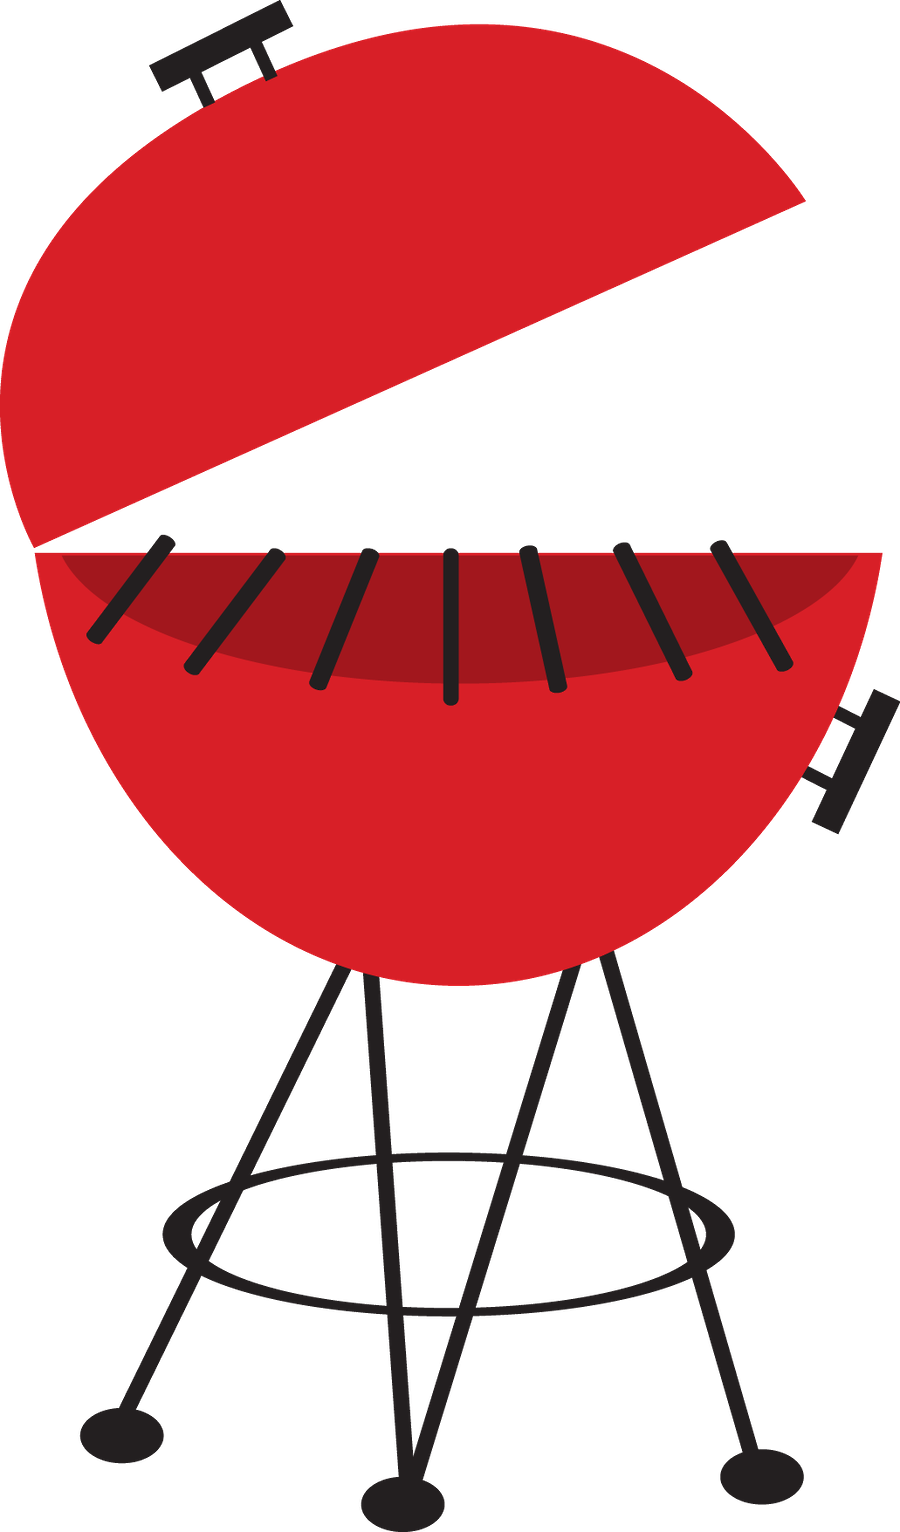 Summer free real and. Grill clipart picnic